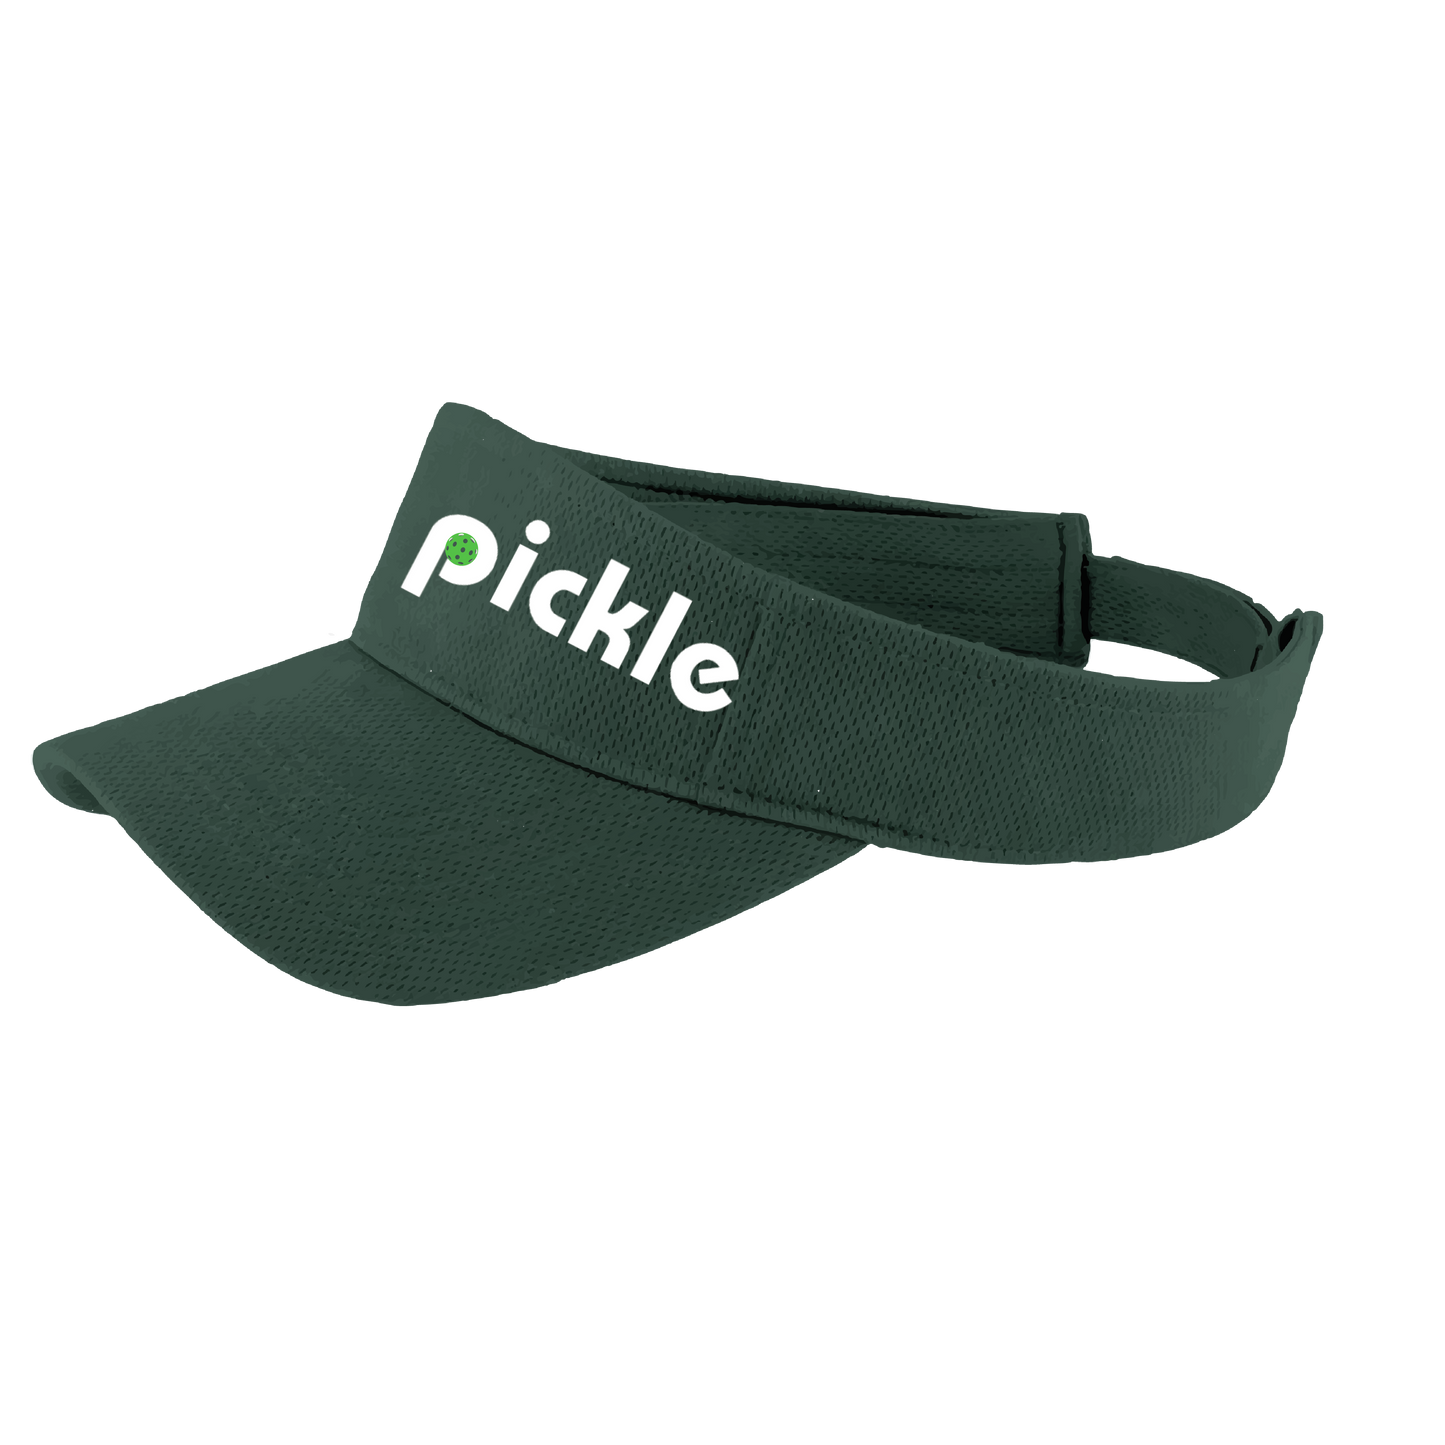 This practical pickleball visor is great for players looking to keep the sun out of their eyes as they focus on the game. Constructed with 100% polyester with closed-hole flat back mesh and PosiCharge Technology, this visor wicks away moisture for added comfort. The back closure is a hook and loop style that adjusts to fit most adults. With this visor, pickleball players can stay comfortable and look great.